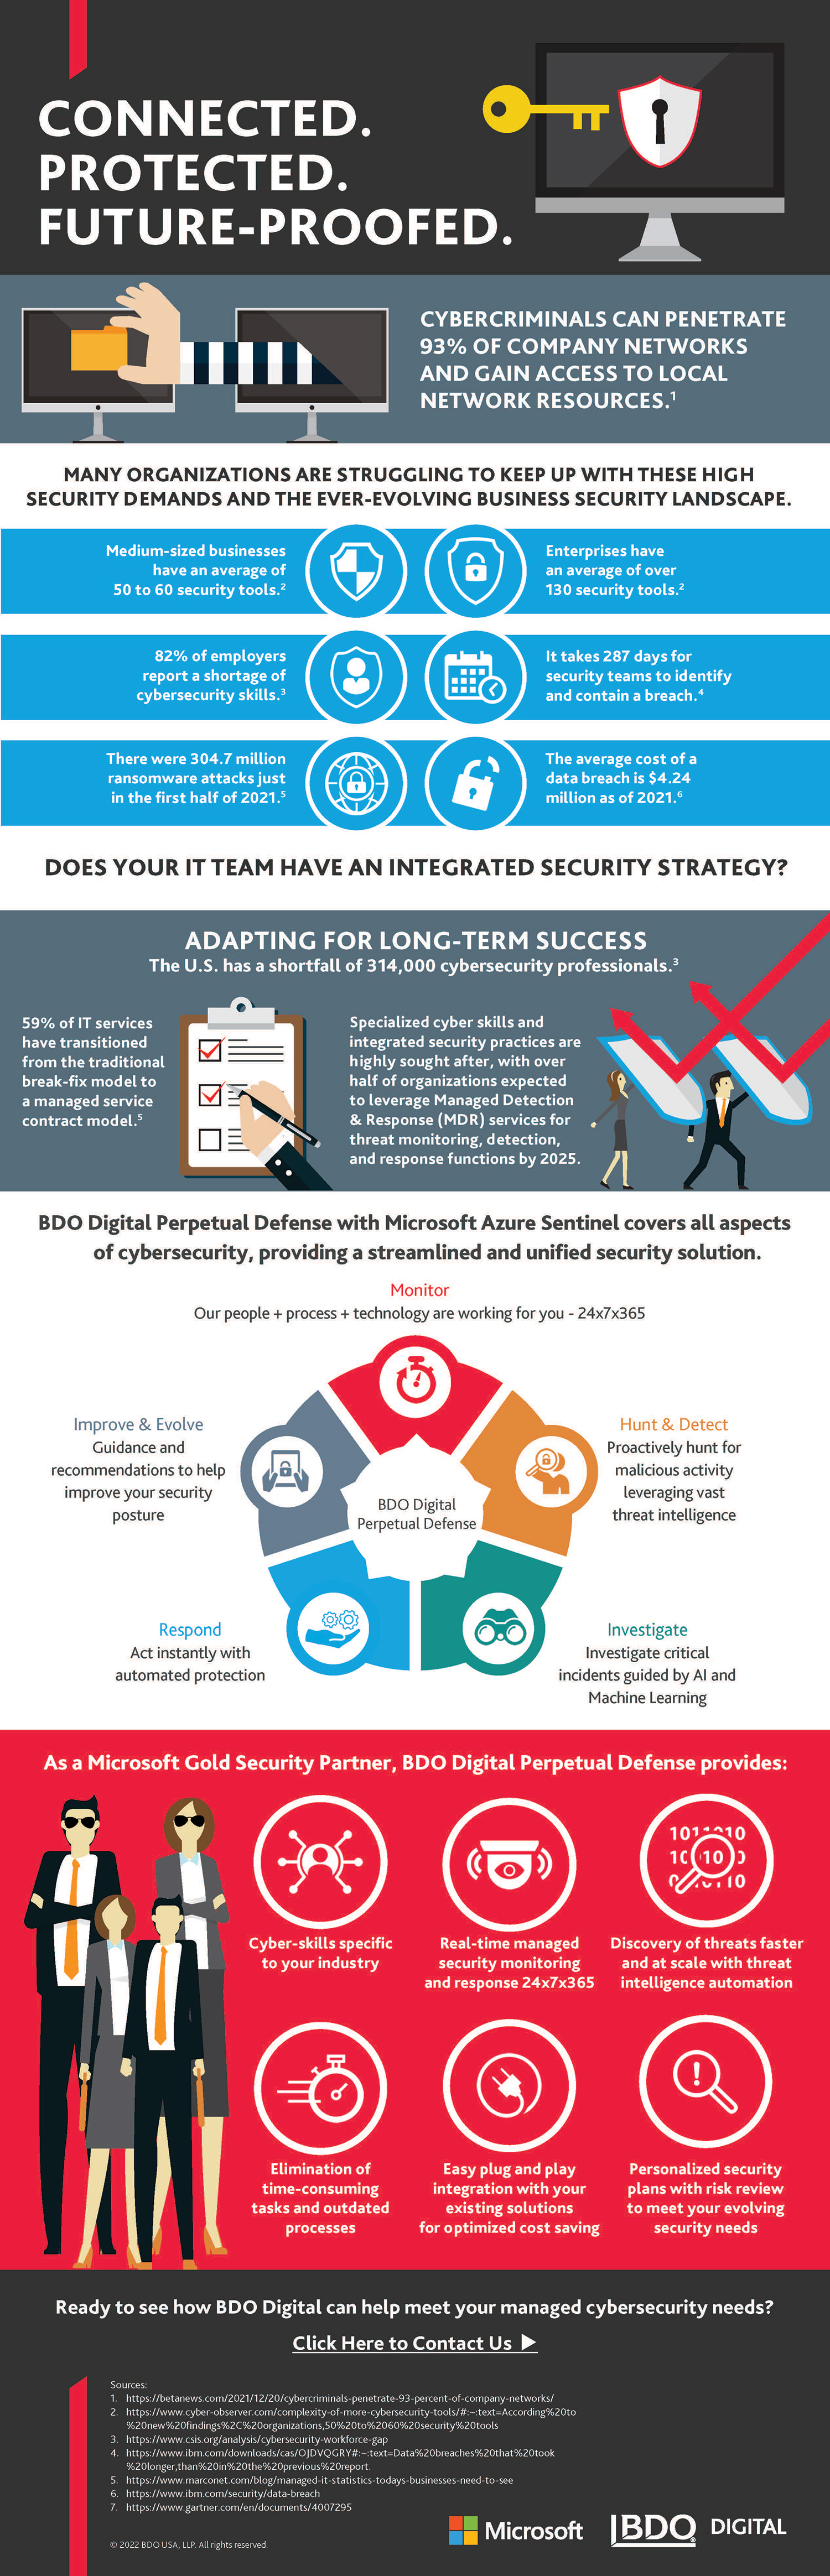 Many organizations are struggling to keep up with these high security demands and the ever-evolving business security landscape.